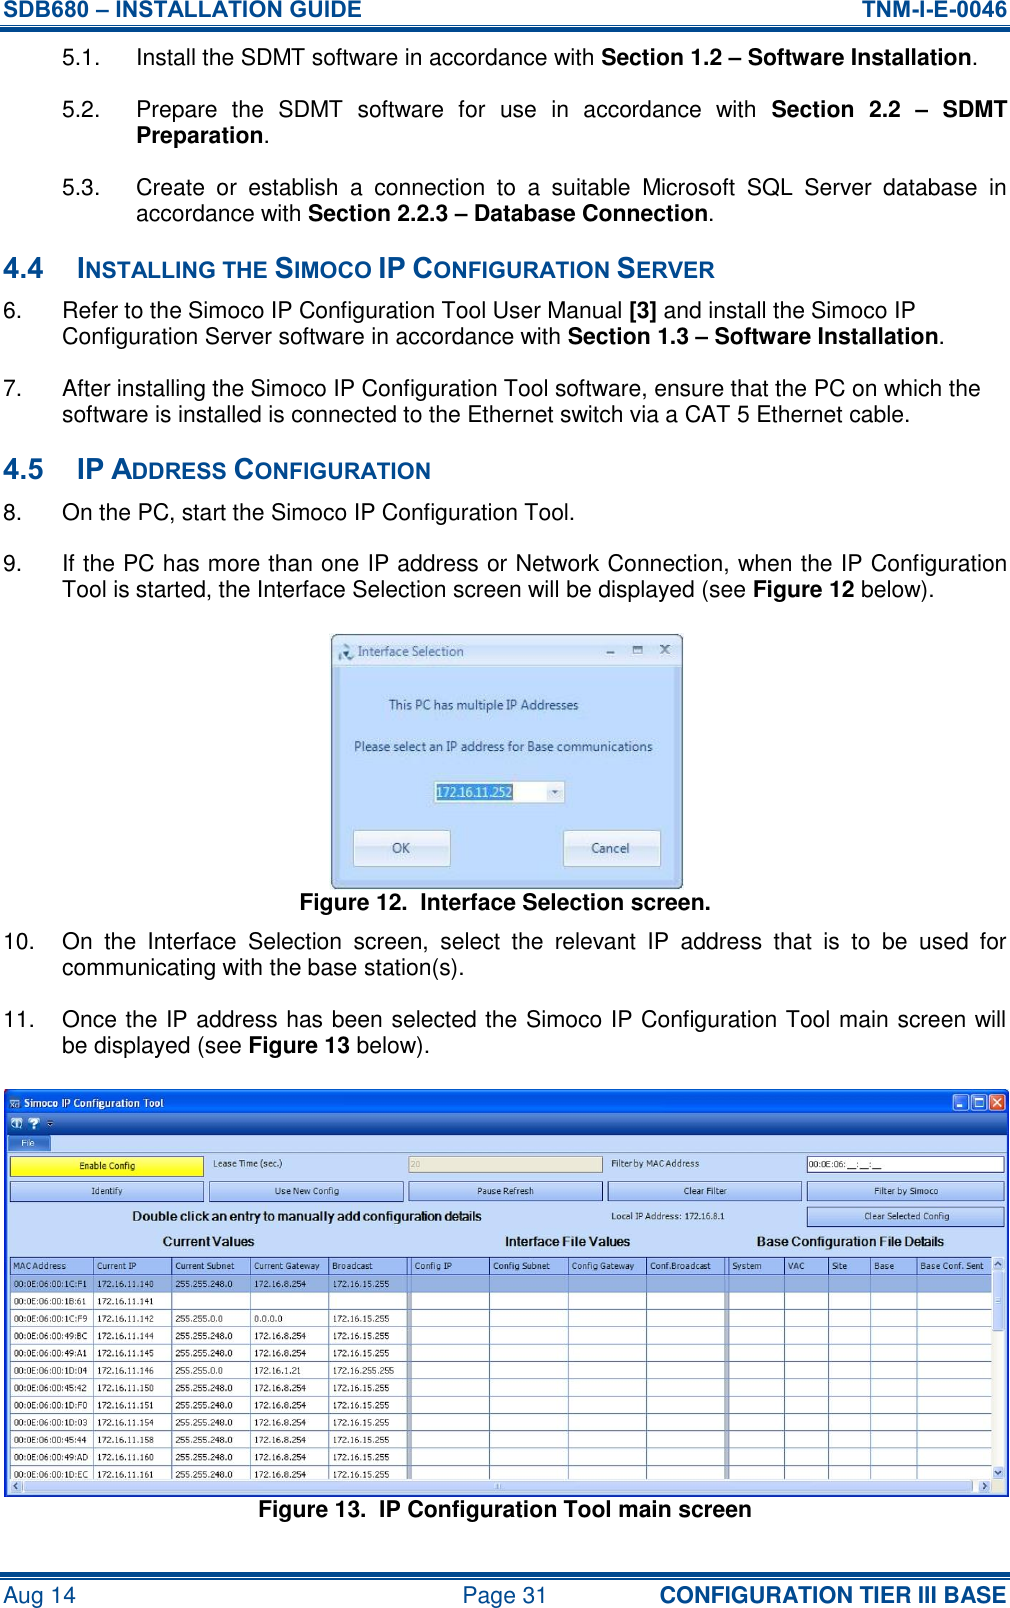 SDB680 – INSTALLATION GUIDE  TNM-I-E-0046 Aug 14  Page 31 CONFIGURATION TIER III BASE 5.1.  Install the SDMT software in accordance with Section 1.2 – Software Installation. 5.2.  Prepare  the  SDMT  software  for  use  in  accordance  with  Section  2.2  –  SDMT Preparation. 5.3.  Create  or  establish  a  connection  to  a  suitable  Microsoft  SQL  Server  database  in accordance with Section 2.2.3 – Database Connection. 4.4 INSTALLING THE SIMOCO IP CONFIGURATION SERVER 6.  Refer to the Simoco IP Configuration Tool User Manual [3] and install the Simoco IP Configuration Server software in accordance with Section 1.3 – Software Installation. 7.  After installing the Simoco IP Configuration Tool software, ensure that the PC on which the software is installed is connected to the Ethernet switch via a CAT 5 Ethernet cable. 4.5 IP ADDRESS CONFIGURATION 8.  On the PC, start the Simoco IP Configuration Tool. 9.  If the PC has more than one IP address or Network Connection, when the IP Configuration Tool is started, the Interface Selection screen will be displayed (see Figure 12 below). Figure 12.  Interface Selection screen. 10.  On  the  Interface  Selection  screen,  select  the  relevant  IP  address  that  is  to  be  used  for communicating with the base station(s). 11.  Once the IP address has been selected the Simoco IP Configuration Tool main screen will be displayed (see Figure 13 below). Figure 13.  IP Configuration Tool main screen 